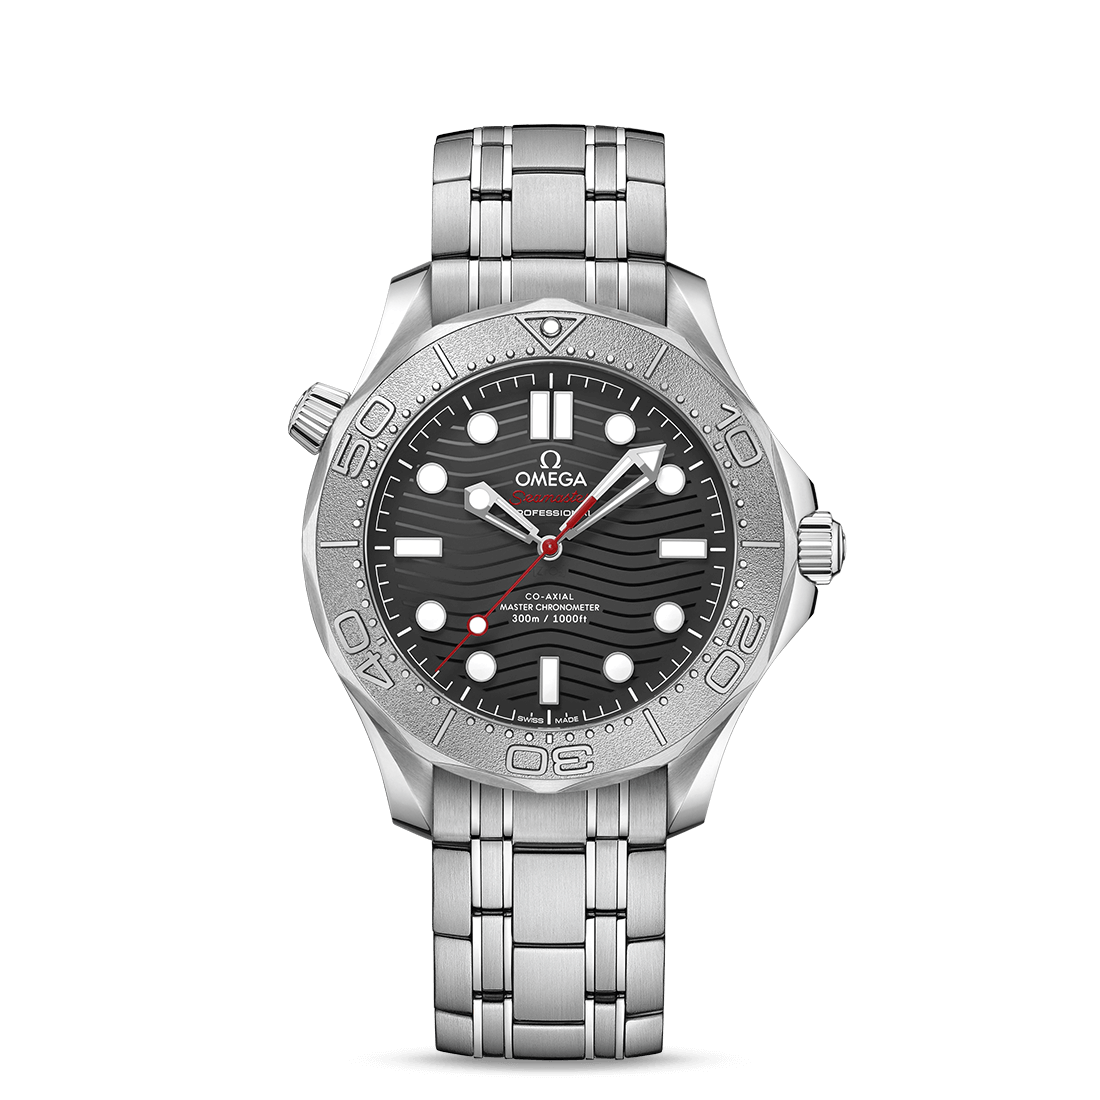 Omega Seamaster Diver 300 M Co-axial Master Chronometer 210.30.42.20.01.002